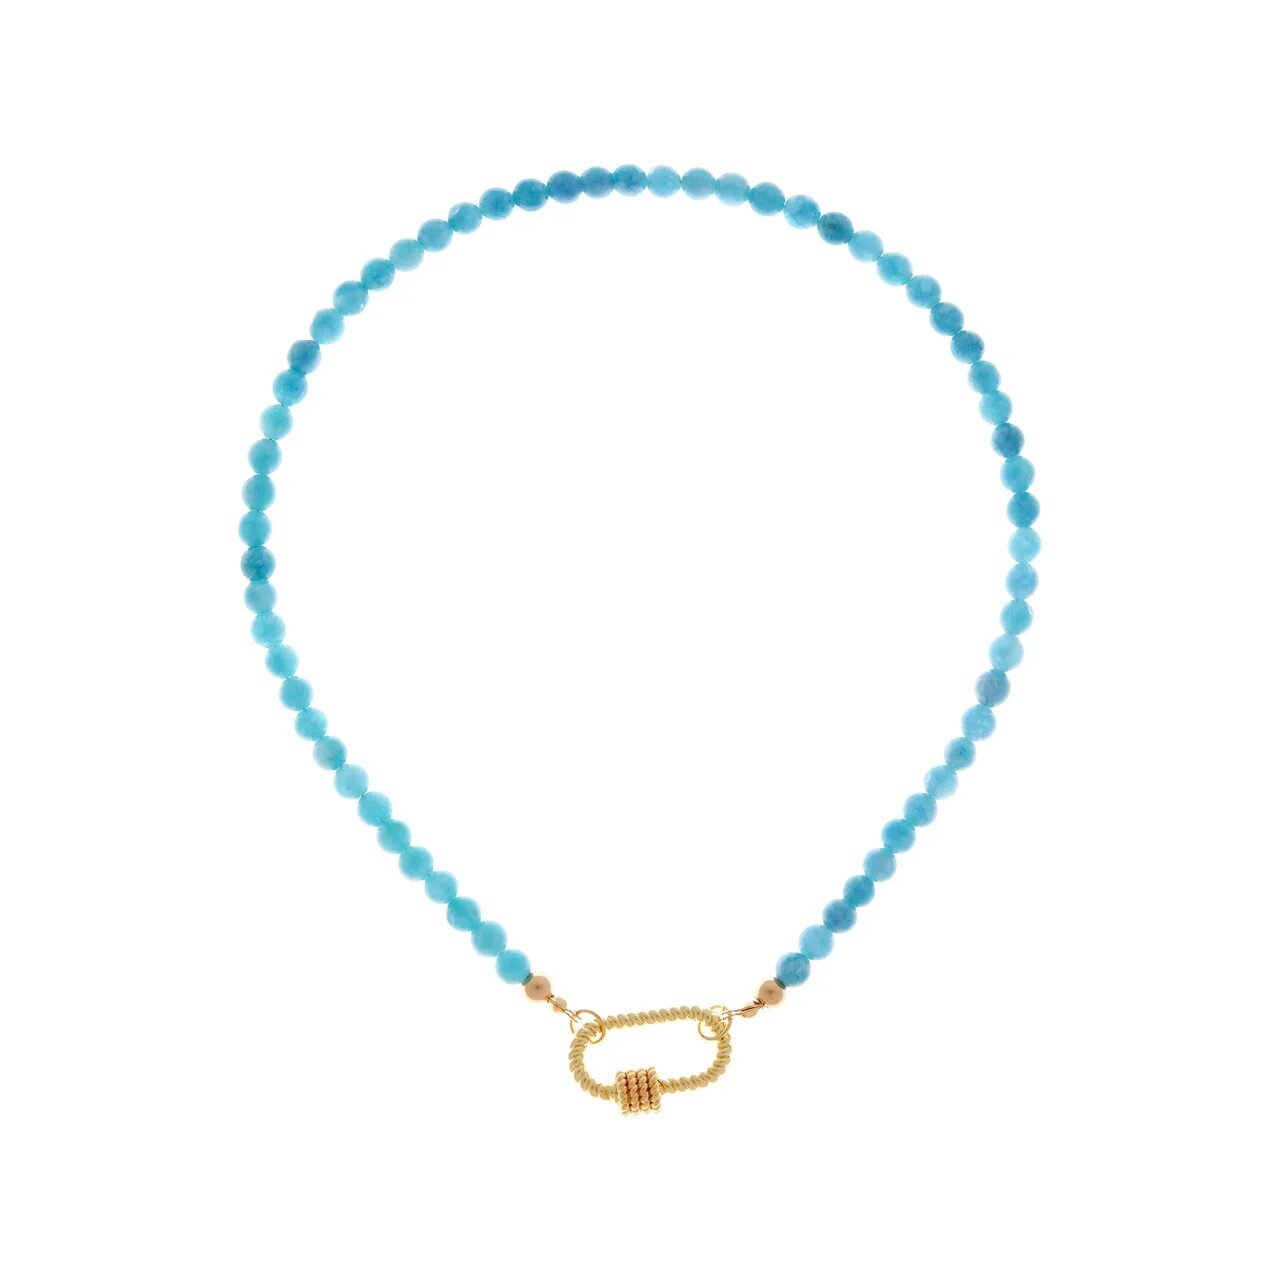 HOLLY JUNE Колье Carabiner Gold Turquoise Necklace holly june колье drop necklace – turquoise